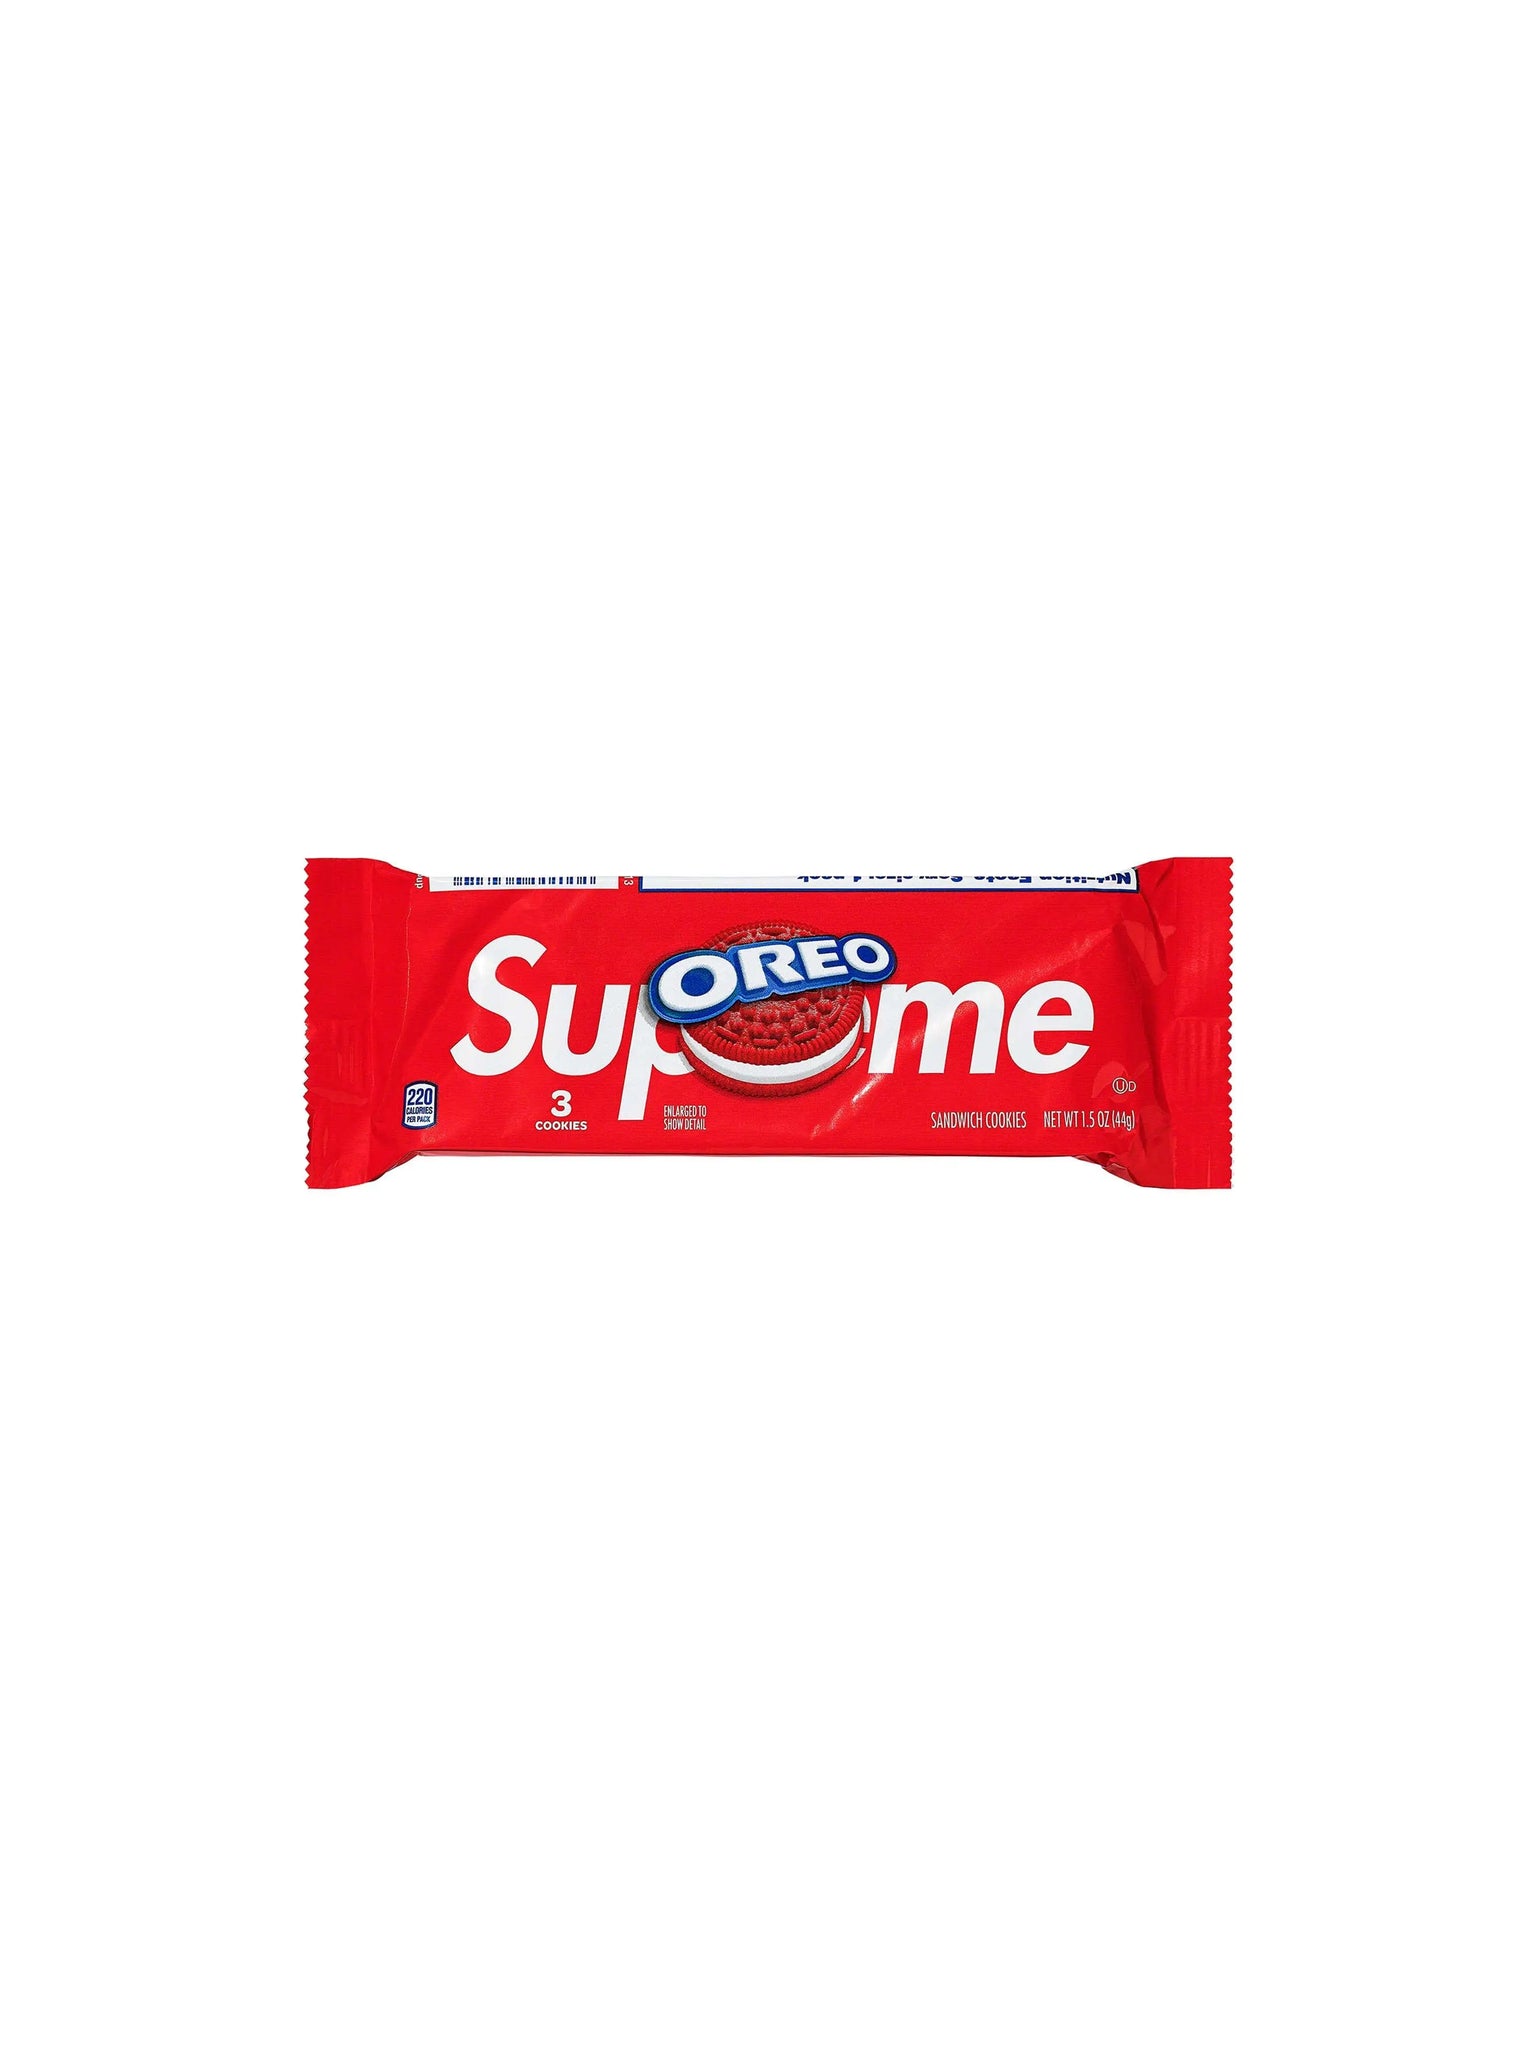 Supreme x Oreo 3-Pack (Not Fit For Human Consumption) in Melbourne, Australia - Prior